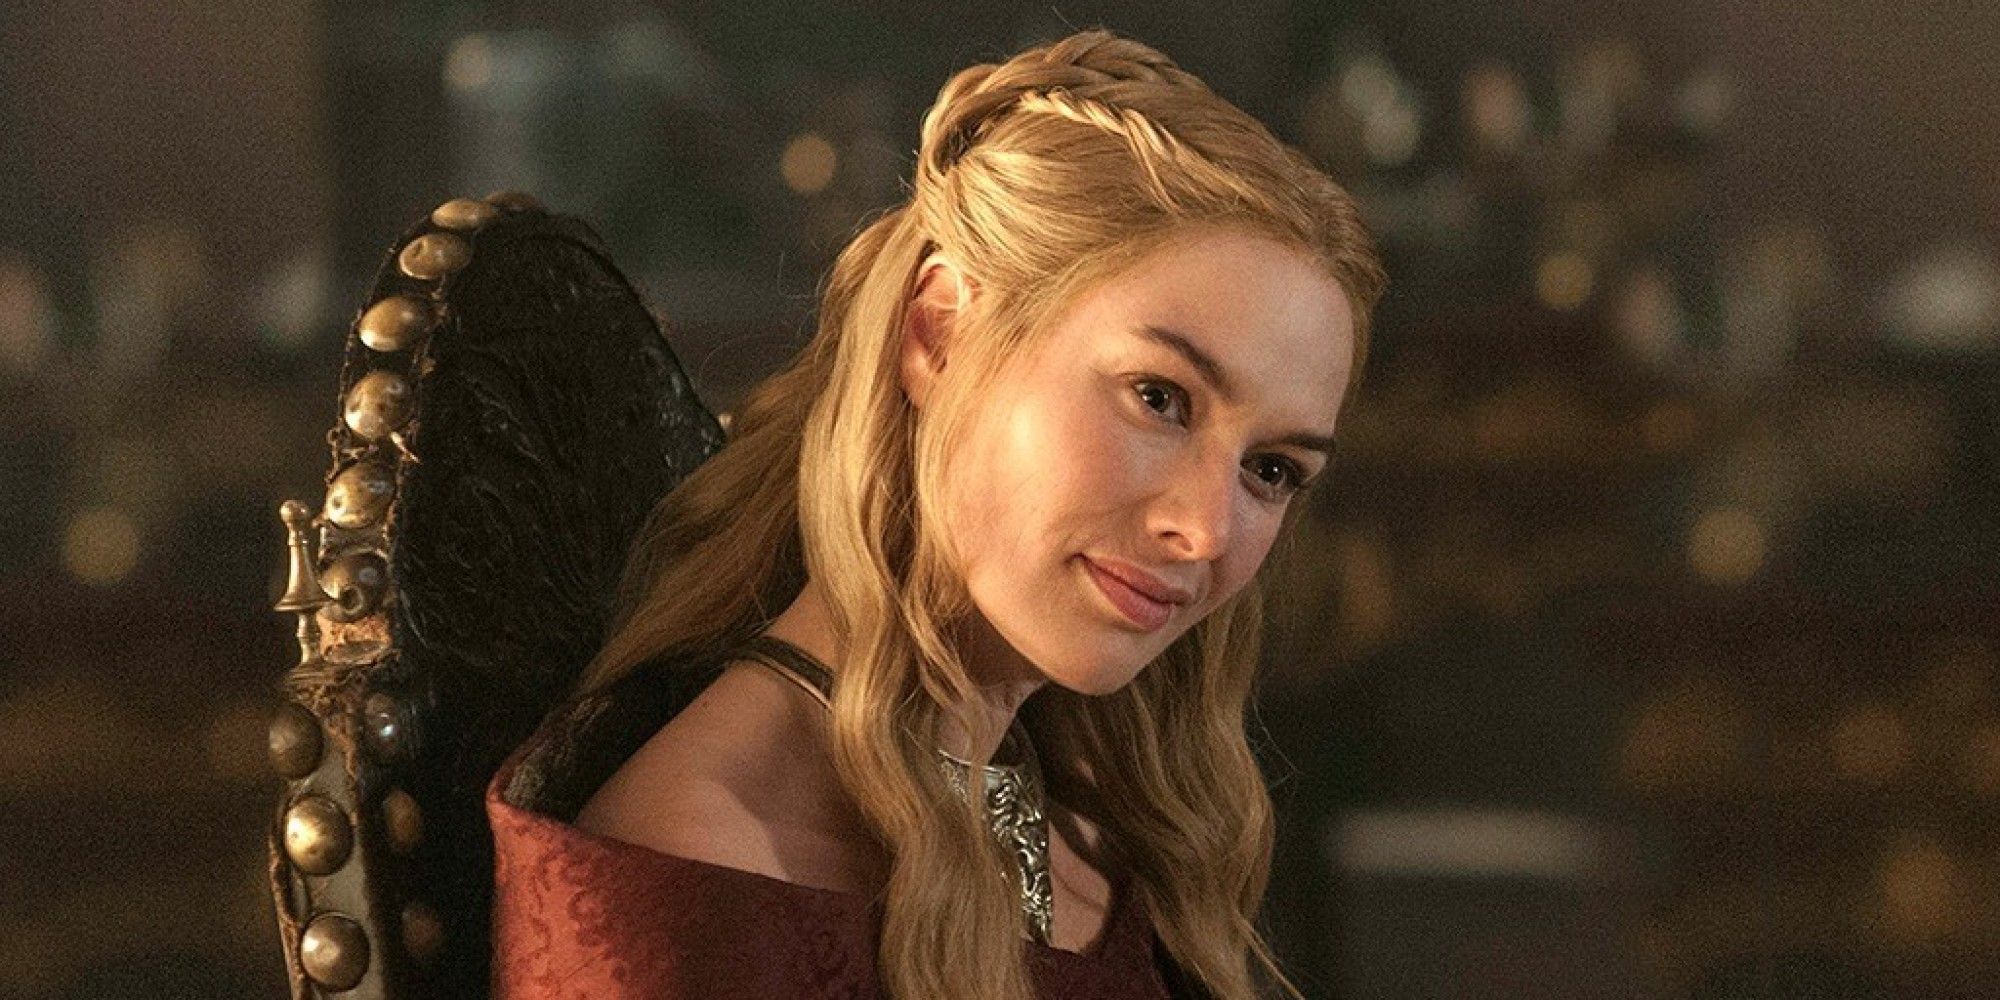 Lena Headey as Cersei Lannister smiling wickedly in Game of Thrones.